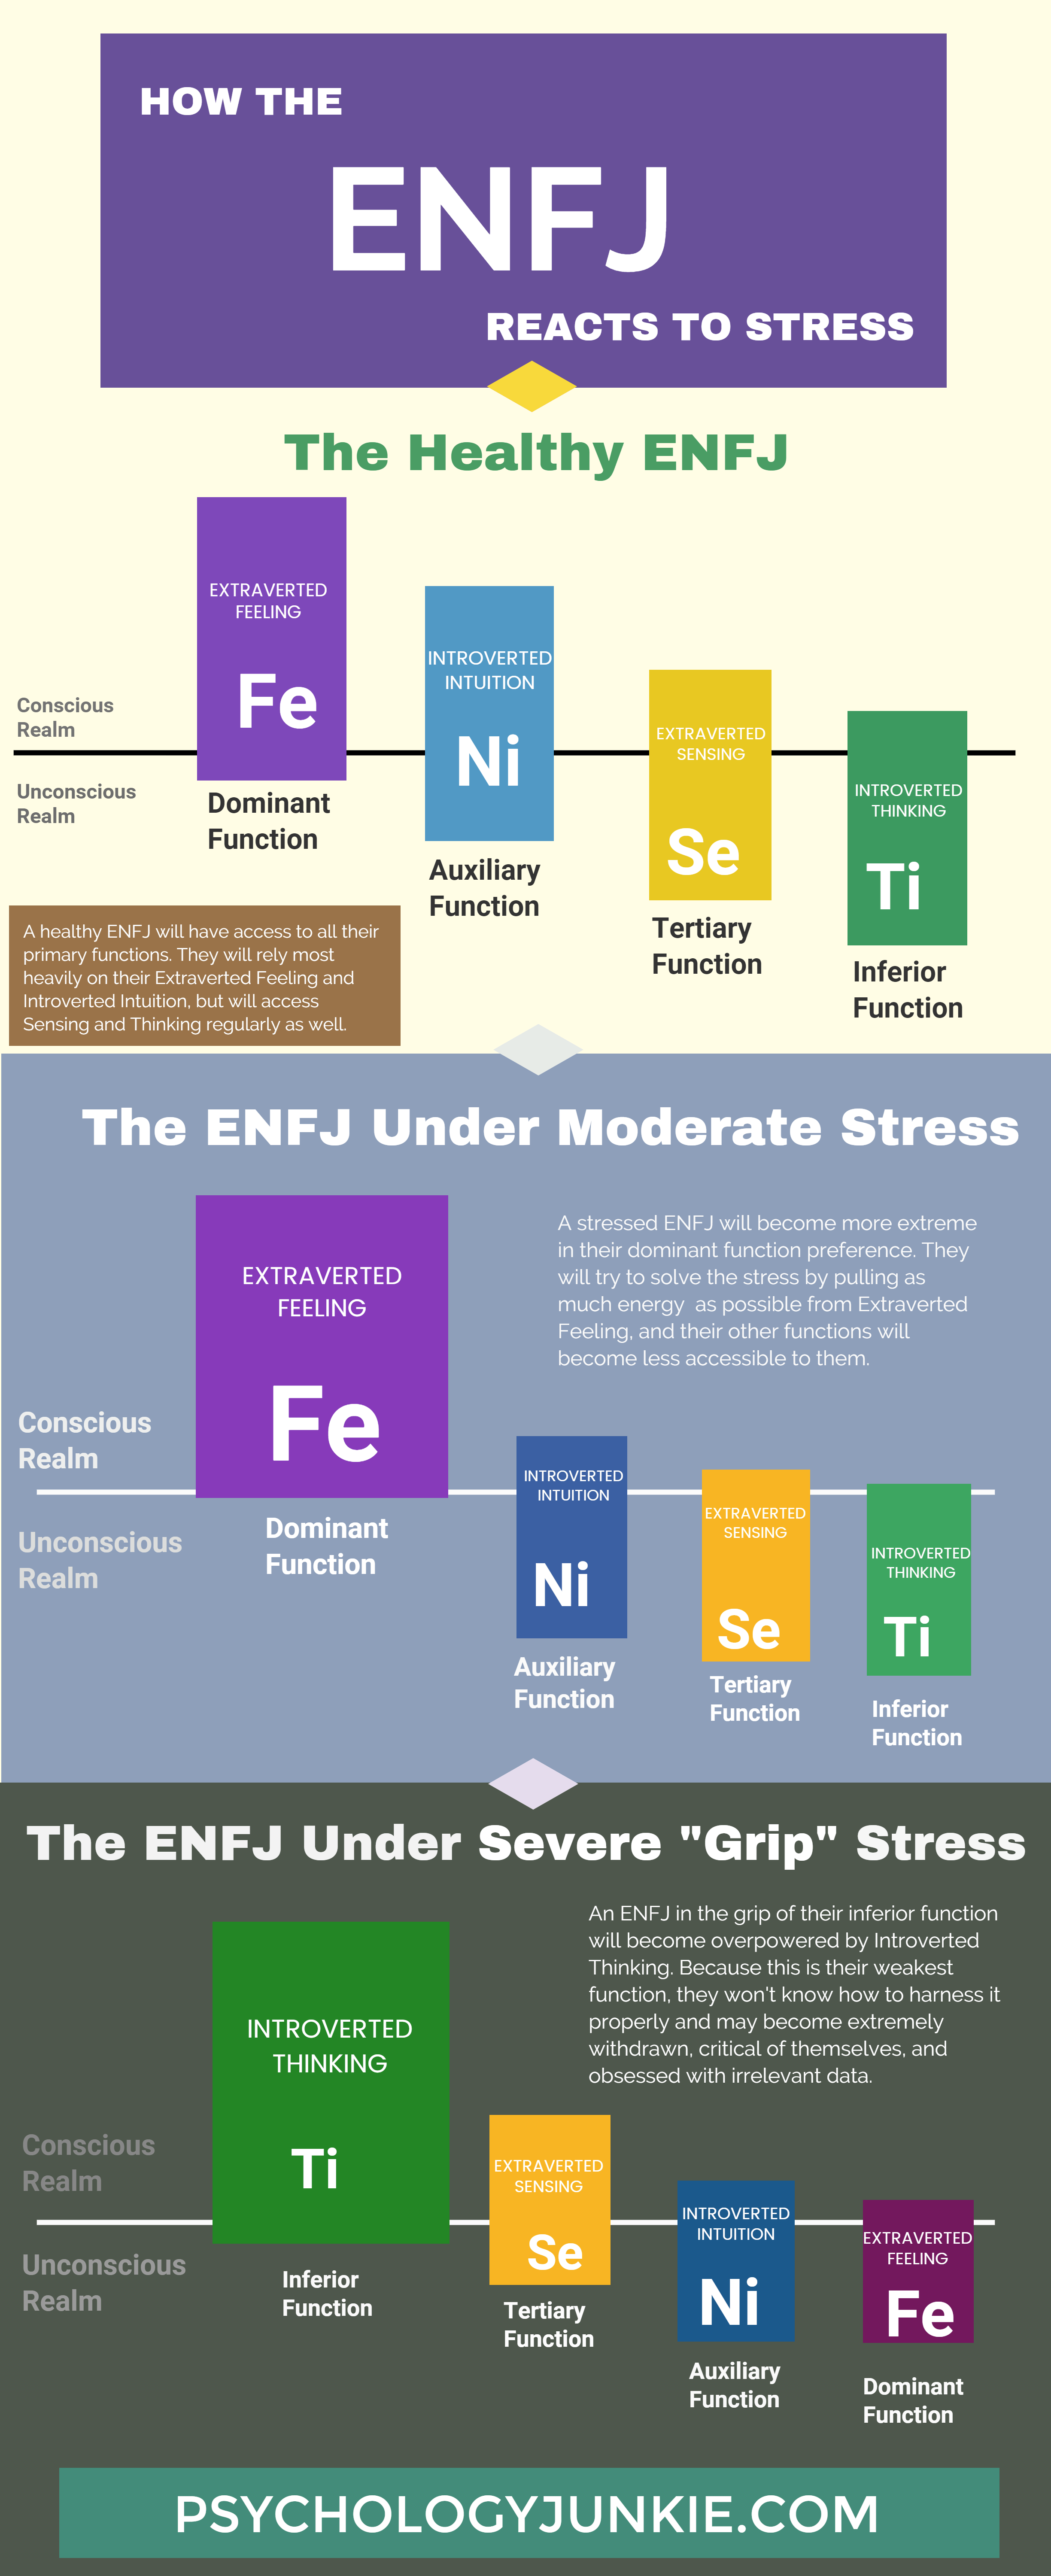 How ENFJs React to Stress Infographic - Psychology Junkie